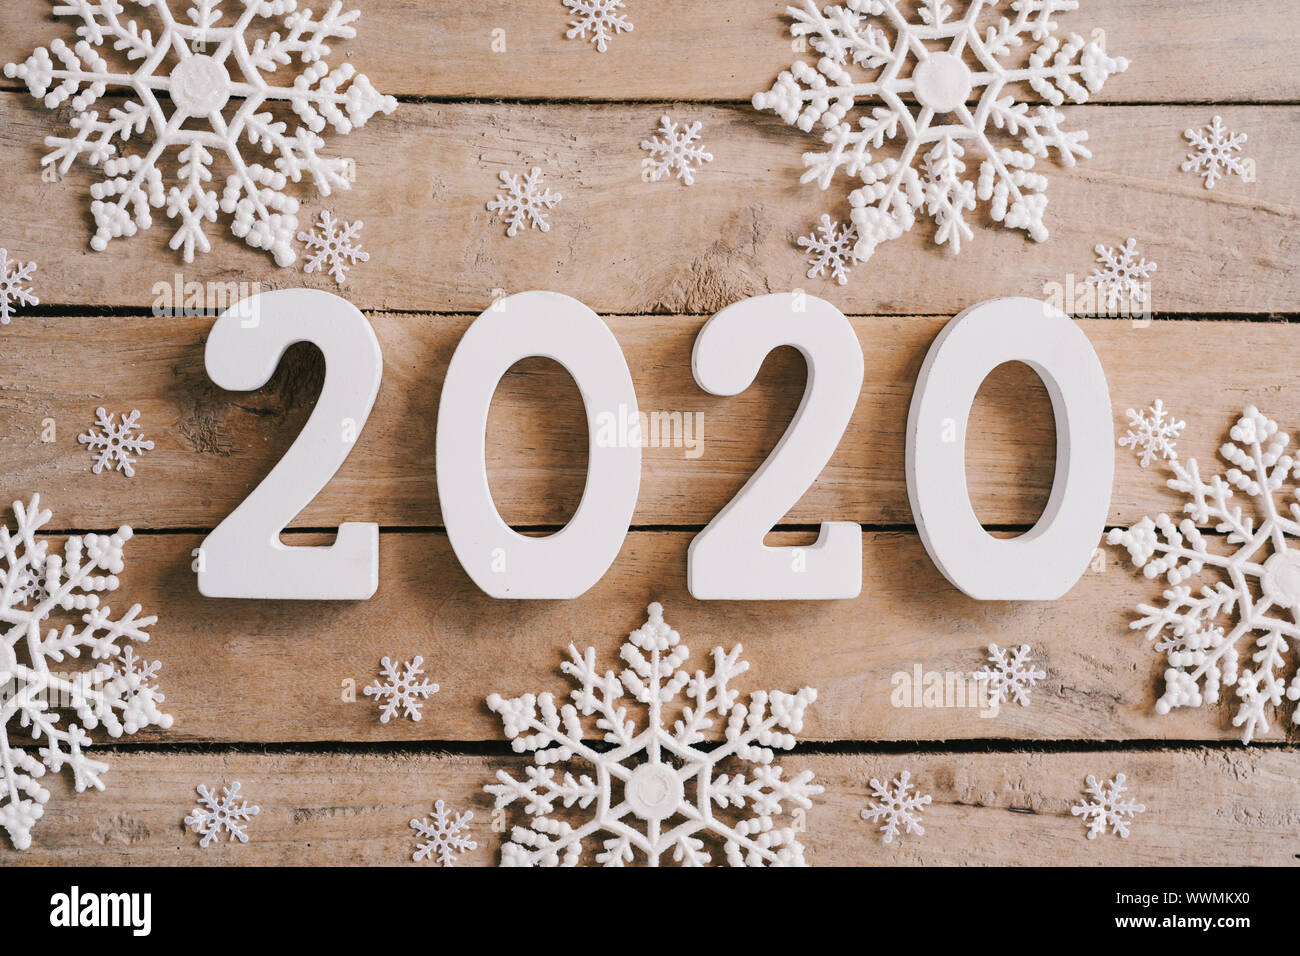 2020 New year concept on wood table and christmas decoration background. Stock Photo